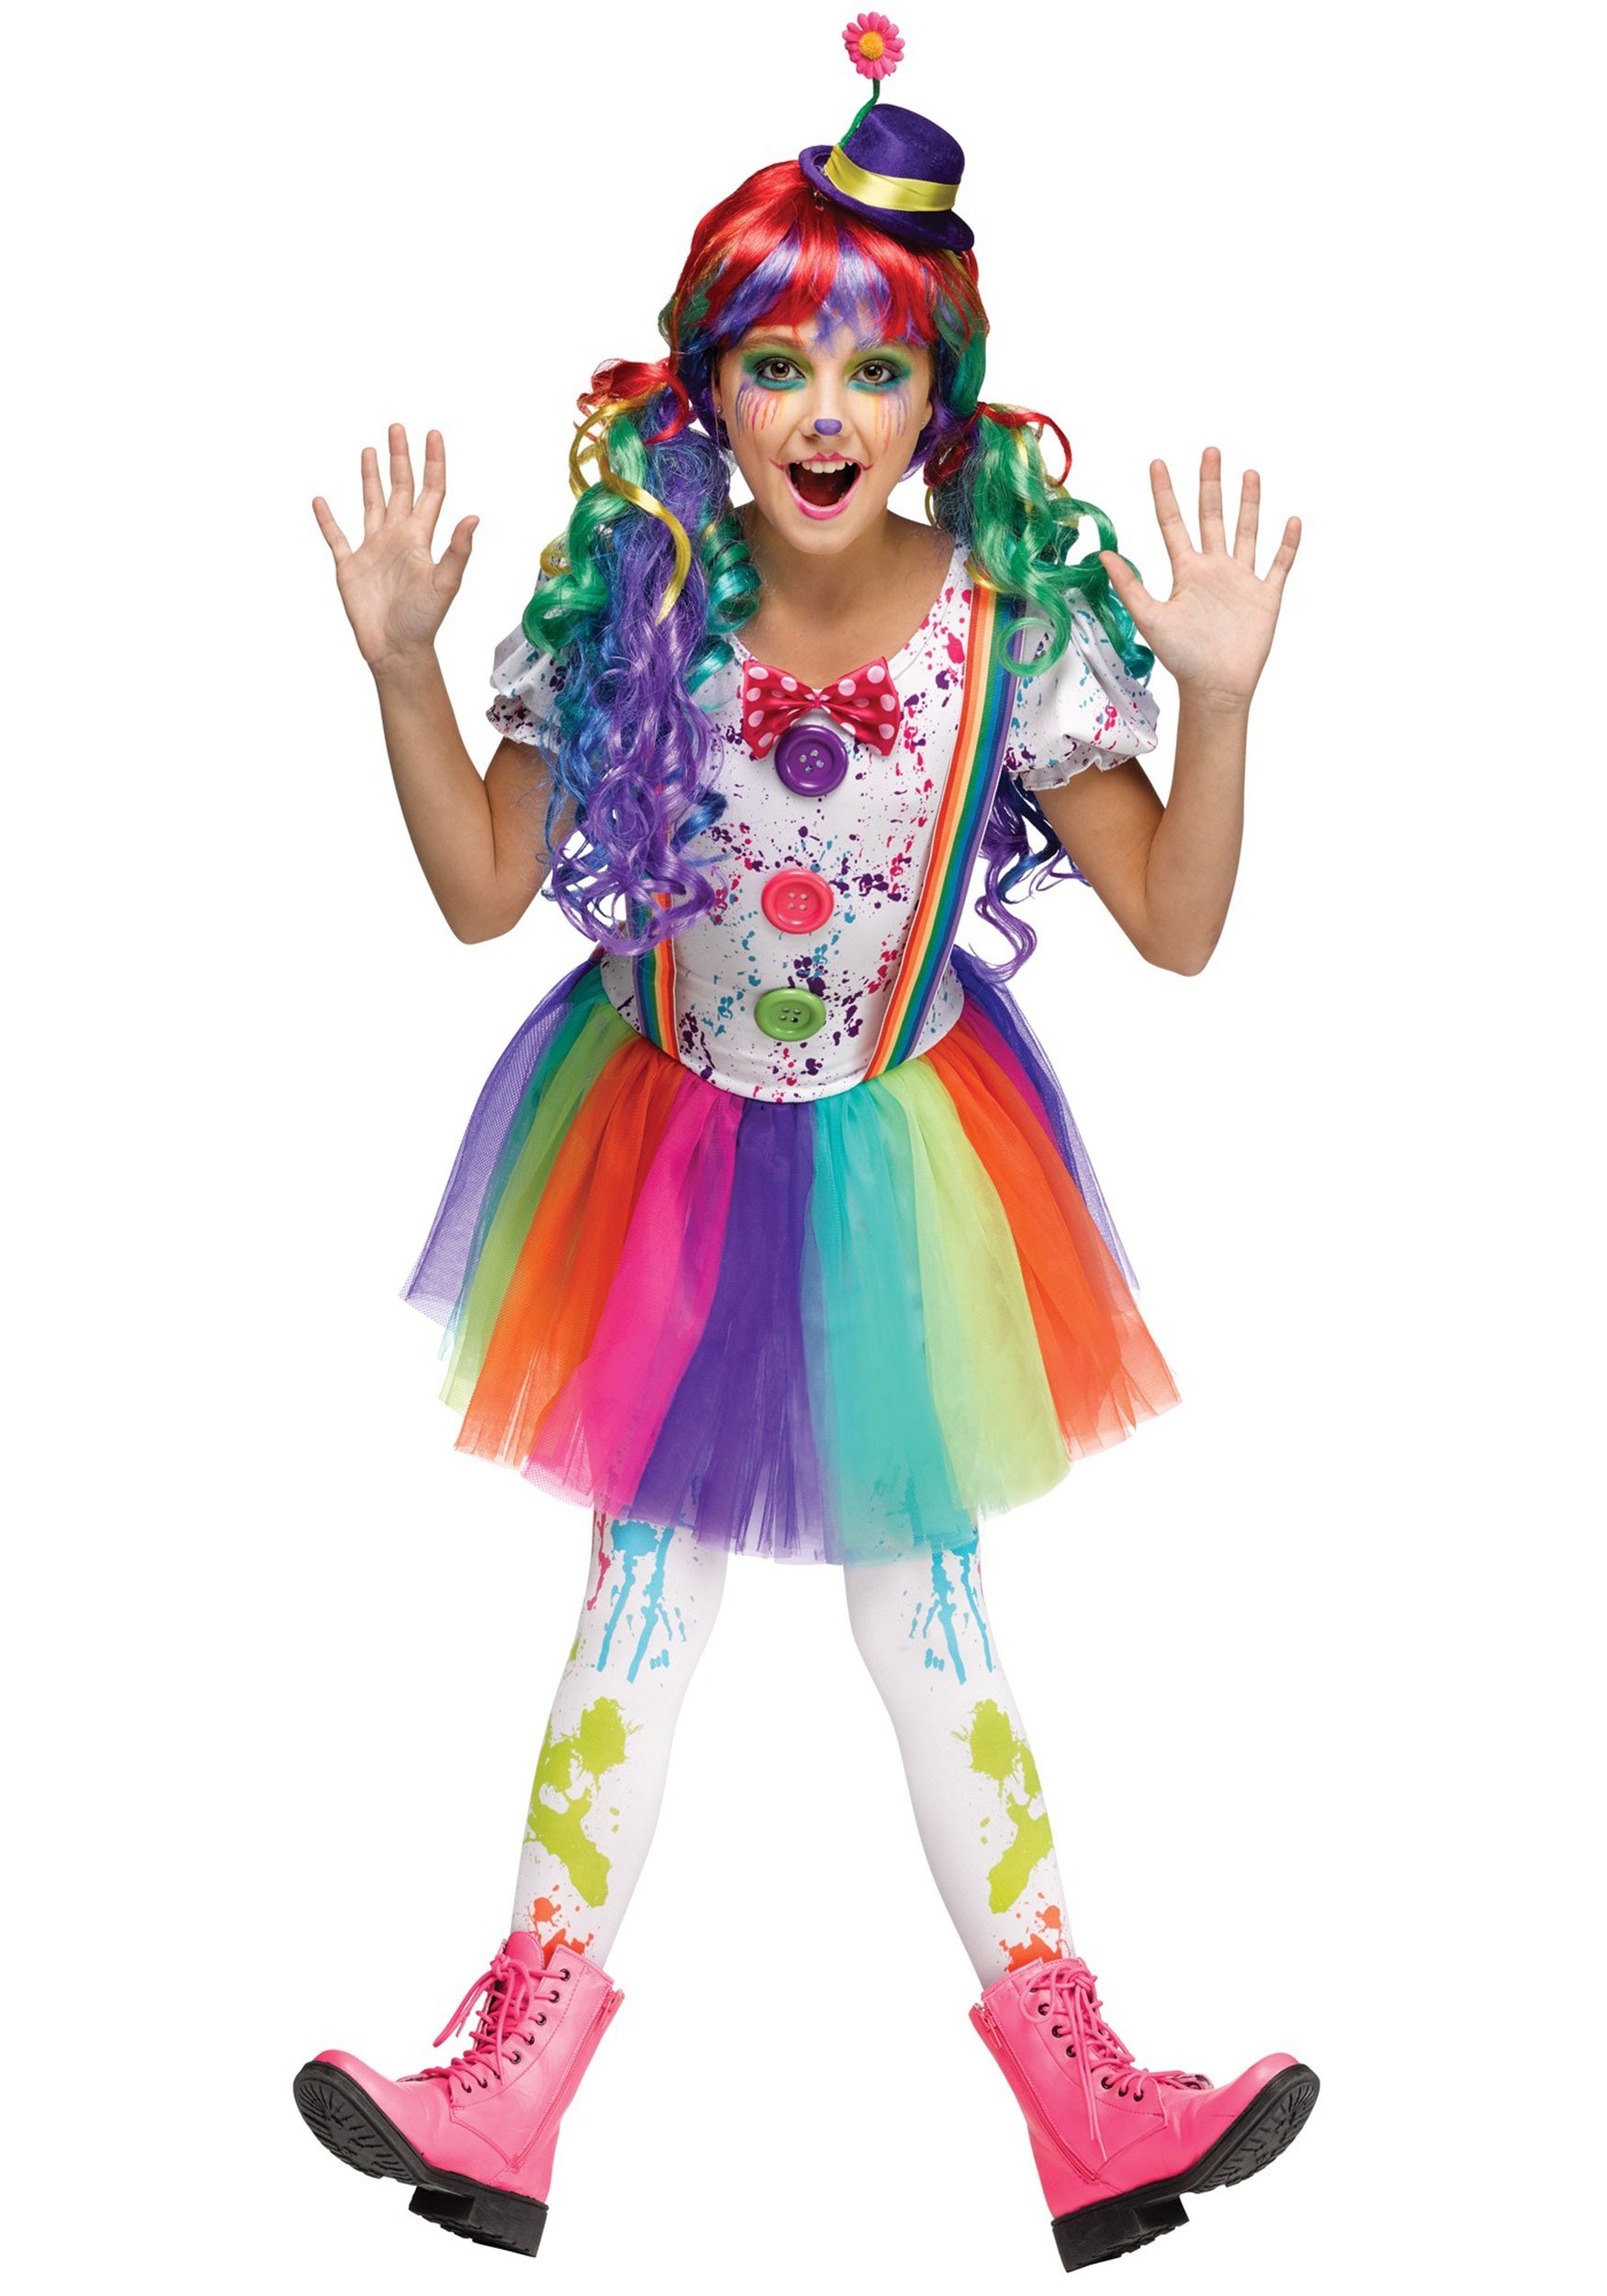 https://images.fun.com/products/39916/1-1/crazy-color-girls-clown-costume.jpg